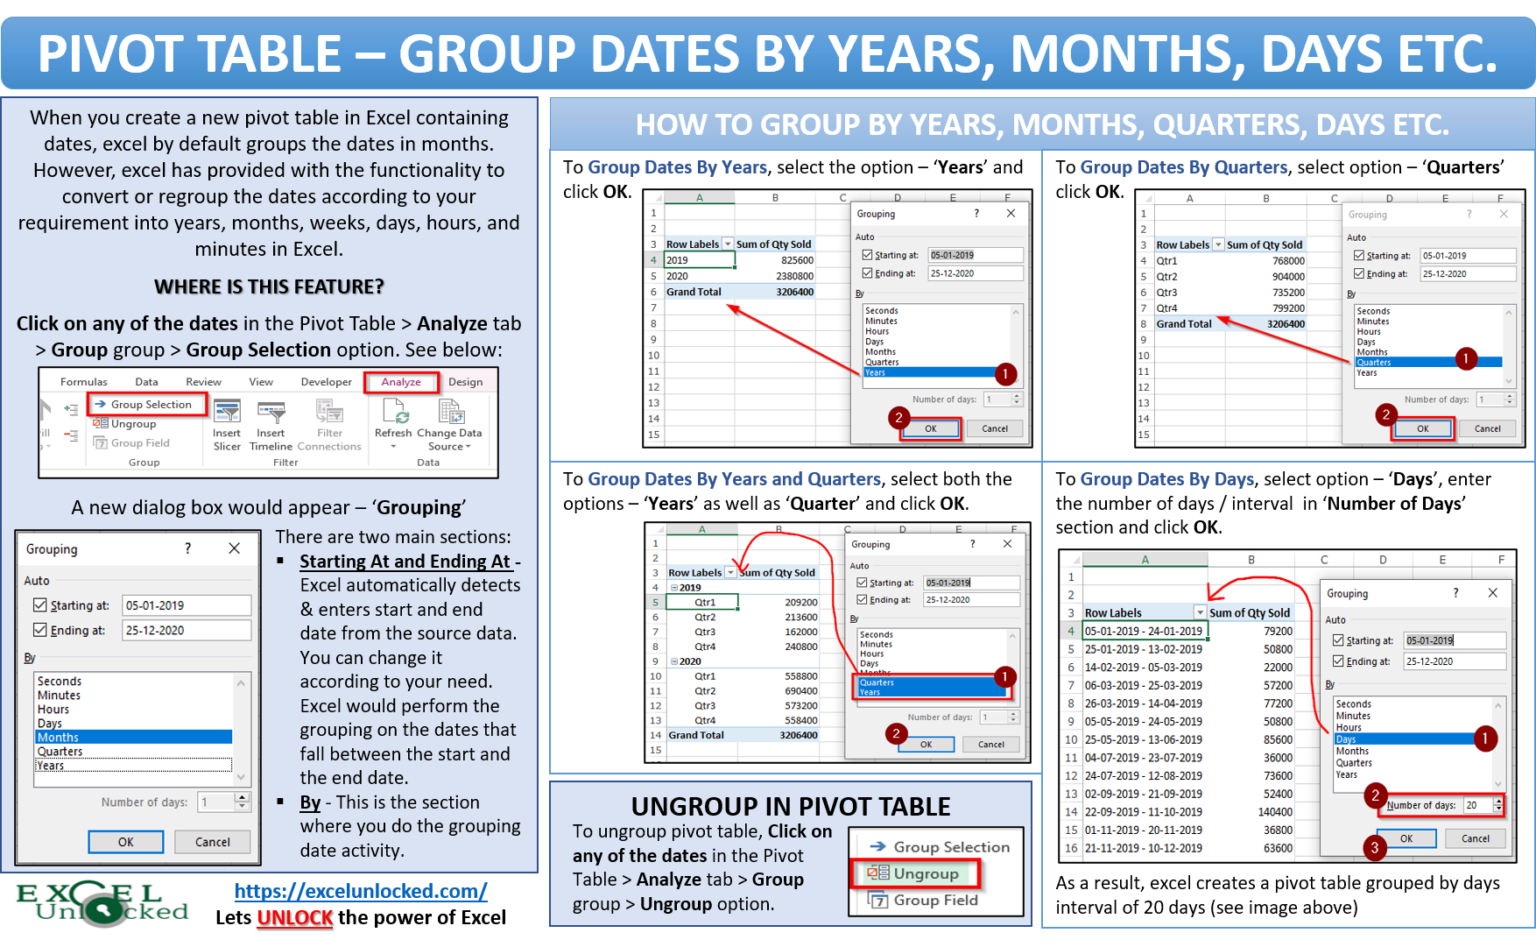 Pivot Table Group Dates by Years, Months, etc. Excel Unlocked